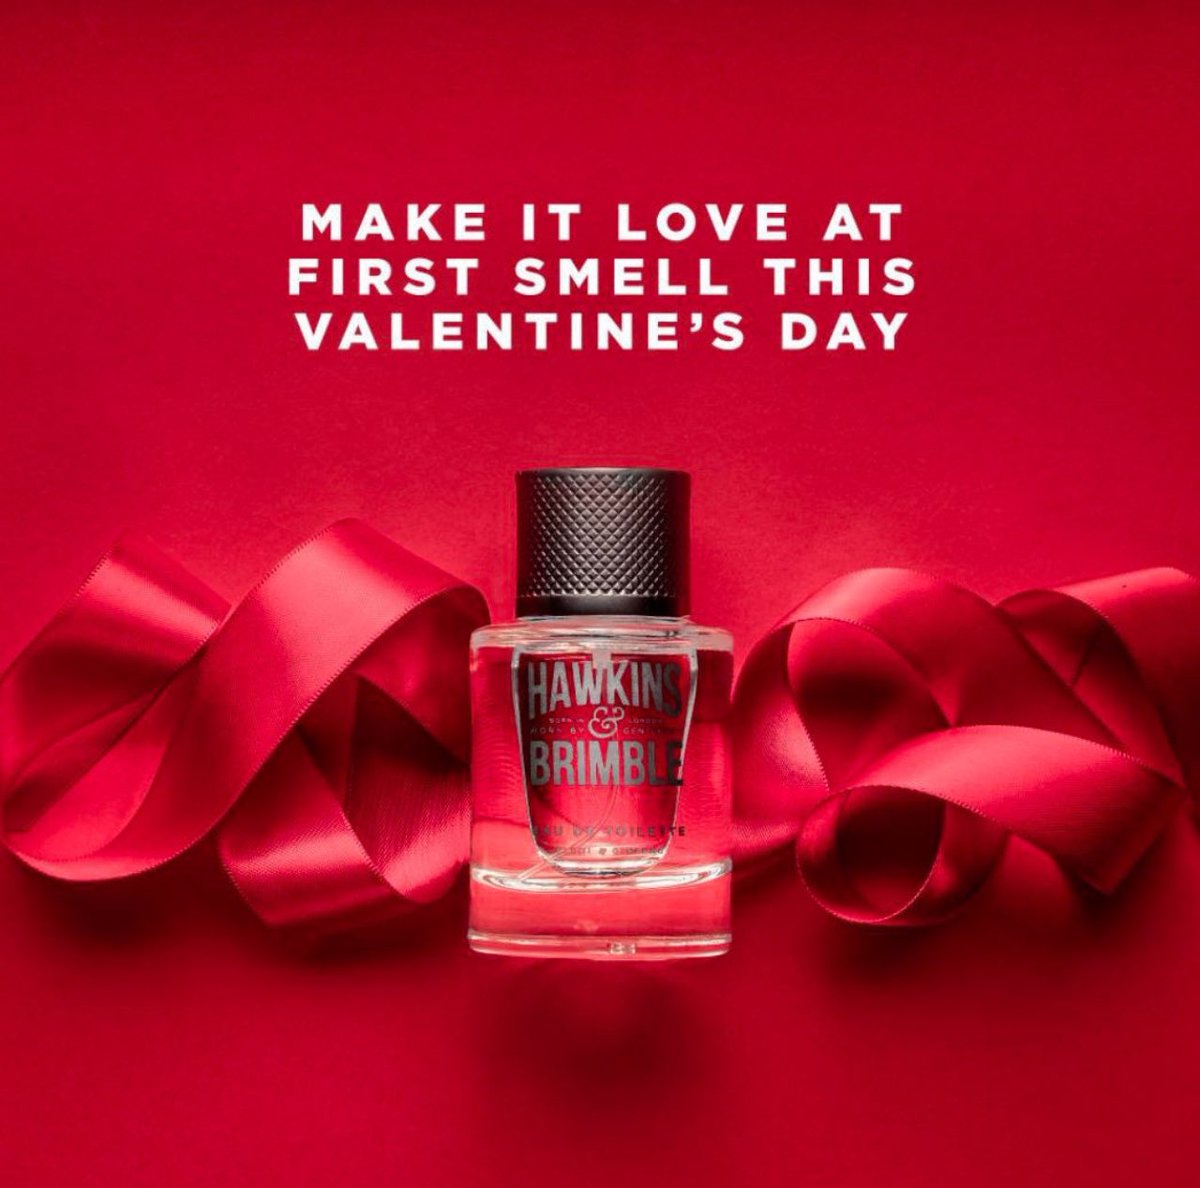 Order your Valentine their perfect gift today. Or, get yourself Valentine’s ready with Hawkins & Brimble.

#HawkinsAndBrimblegr #ValentinesGift #GiftsForHim #EDT #ValentinesDay #OneBeautygr